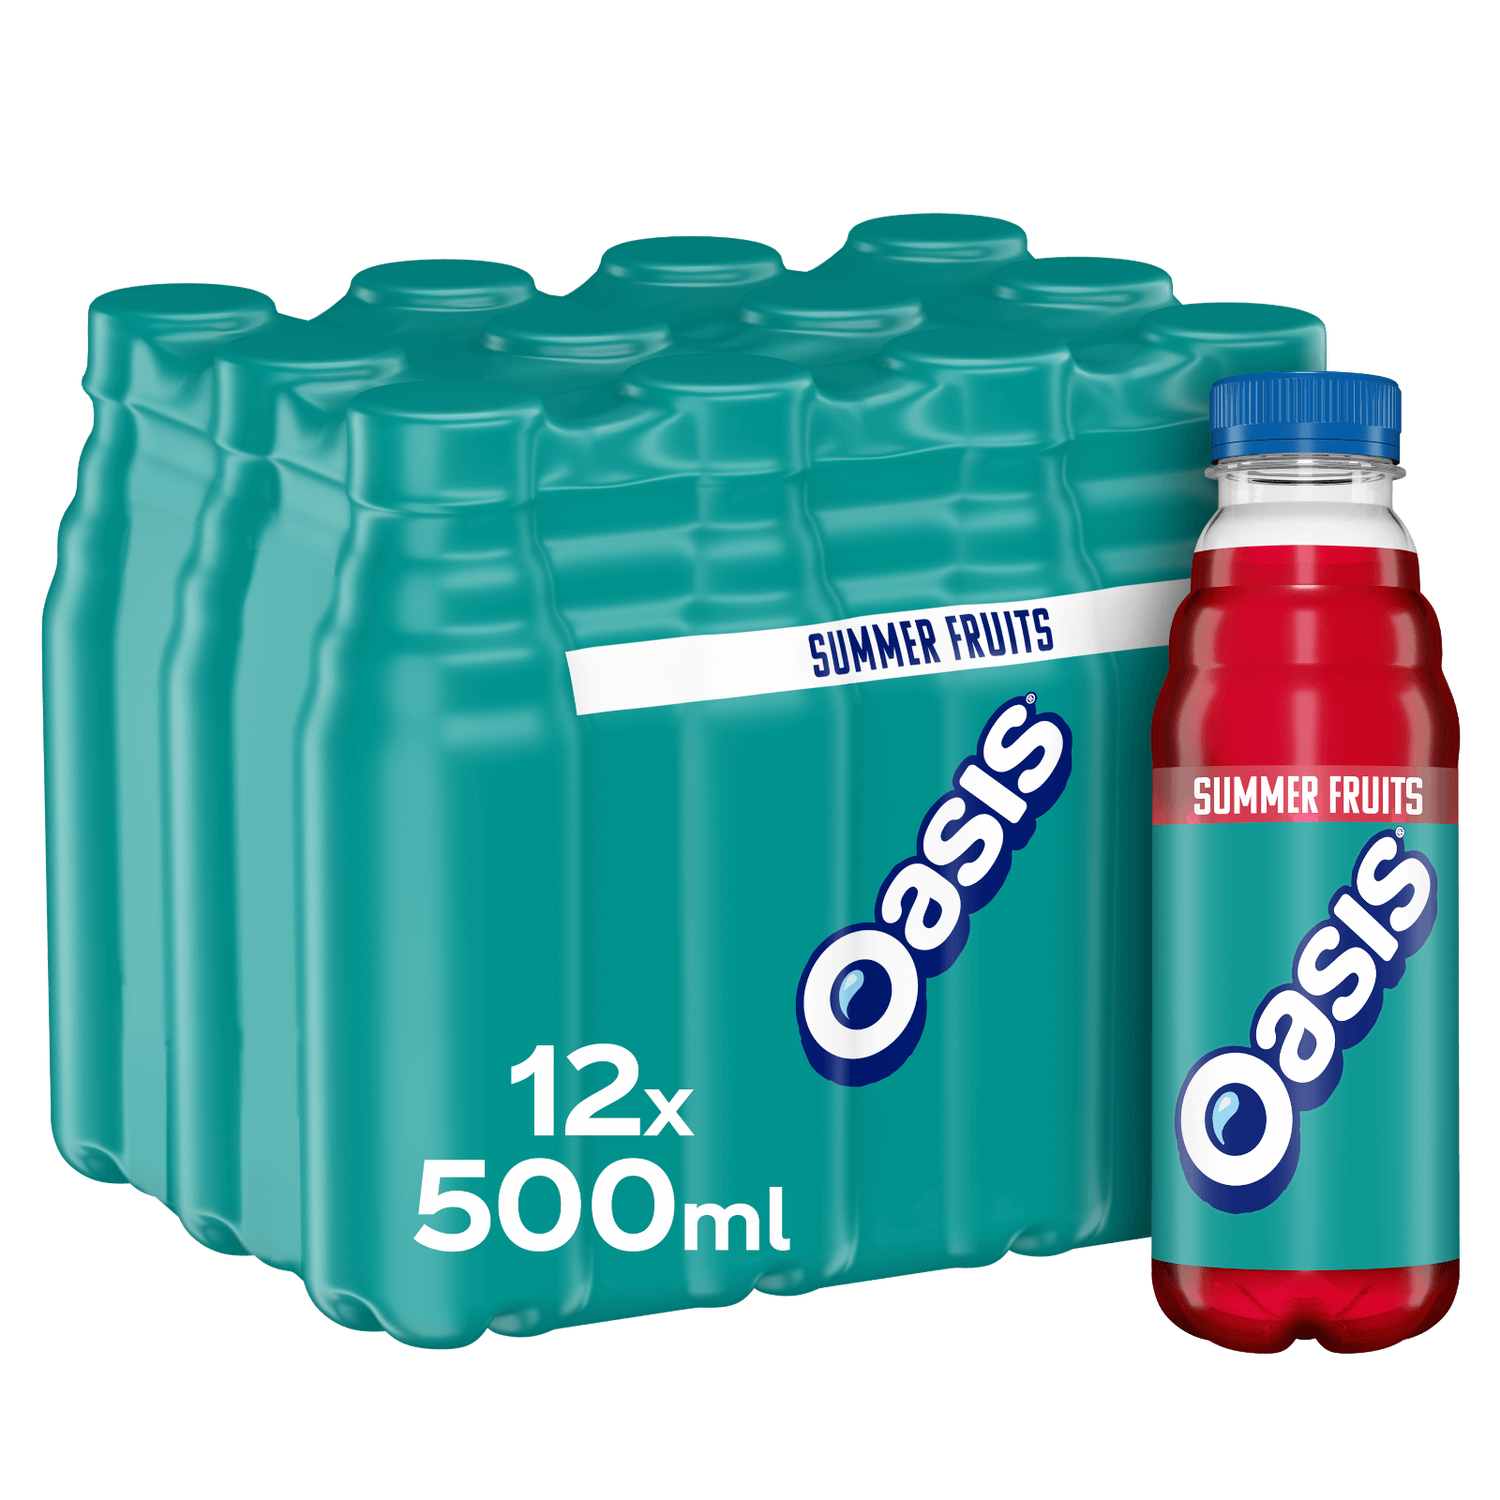 Oasis Summer Fruits - 500ml - Case of 12